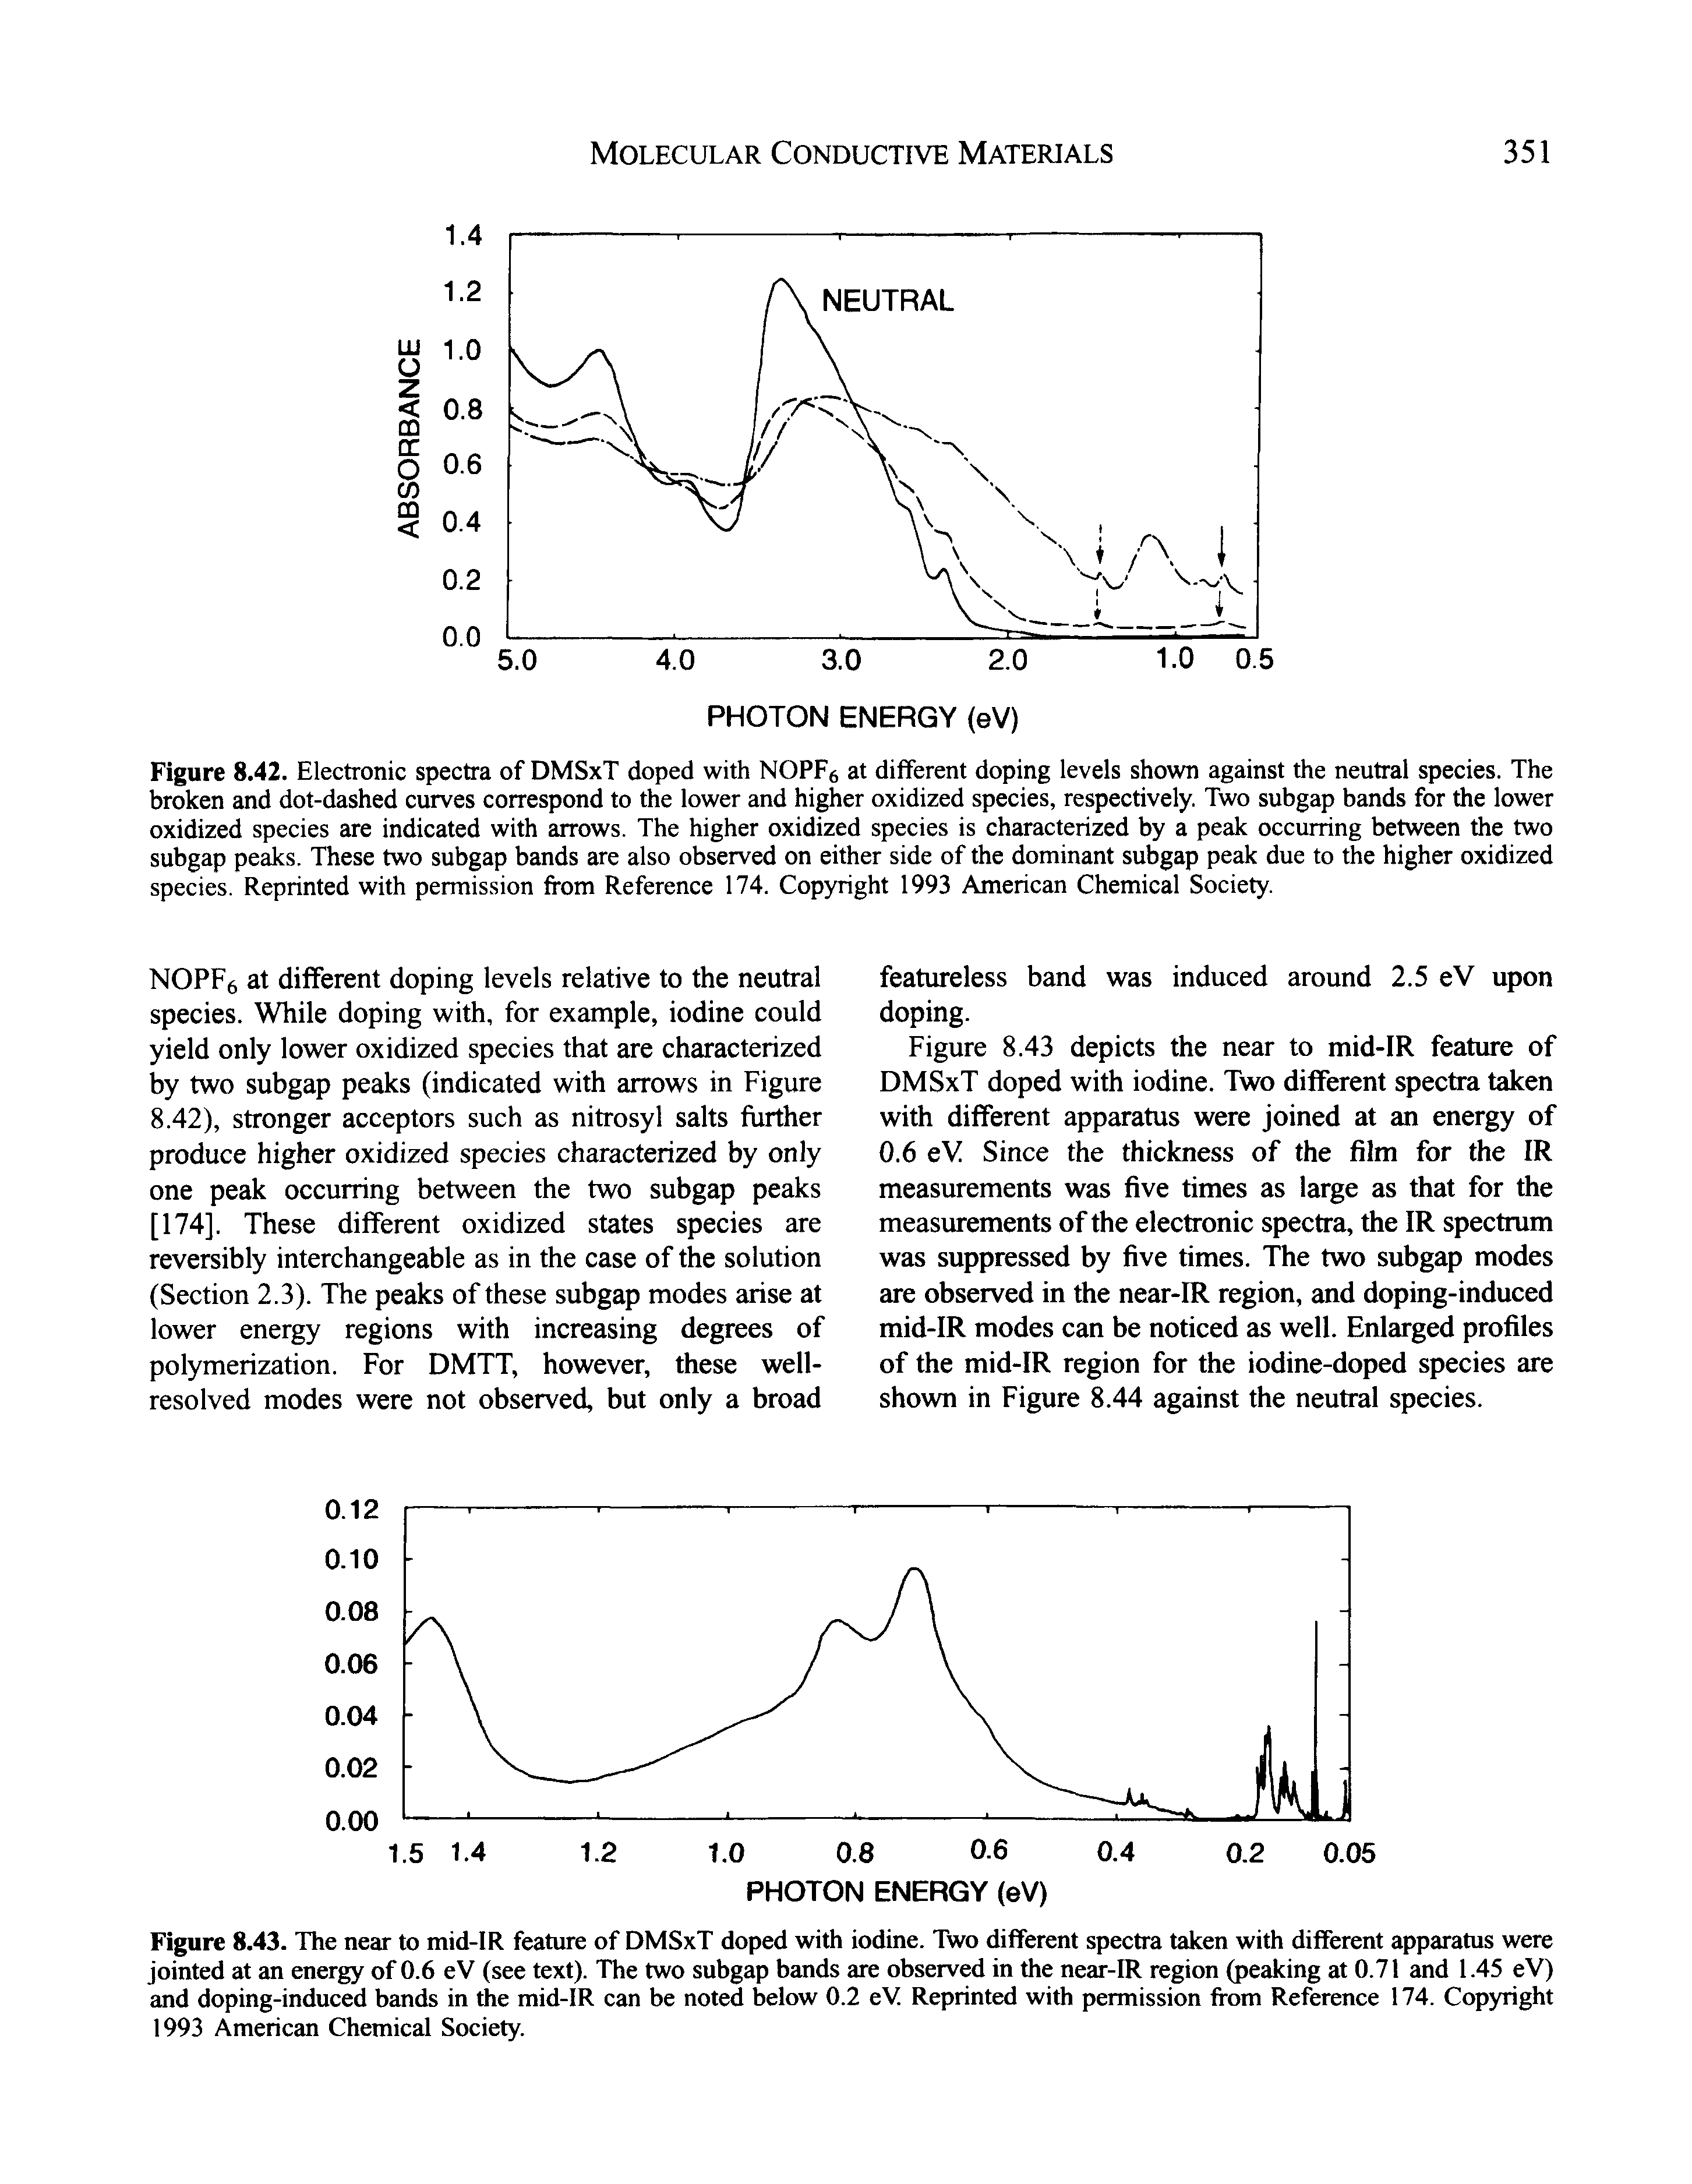 Figure 8.43. The near to mid-IR feature of DMSxT doped with iodine. Two different spectra taken with different apparatus were jointed at an energy of 0.6 eV (see text). The two subgap bands are observed in the near-IR region (peaking at 0.71 and 1.45 eV) and doping-induced bands in the mid-IR can be noted below 0.2 eV Reprinted with permission from Reference 174. Copyright 1993 American Chemical Society.